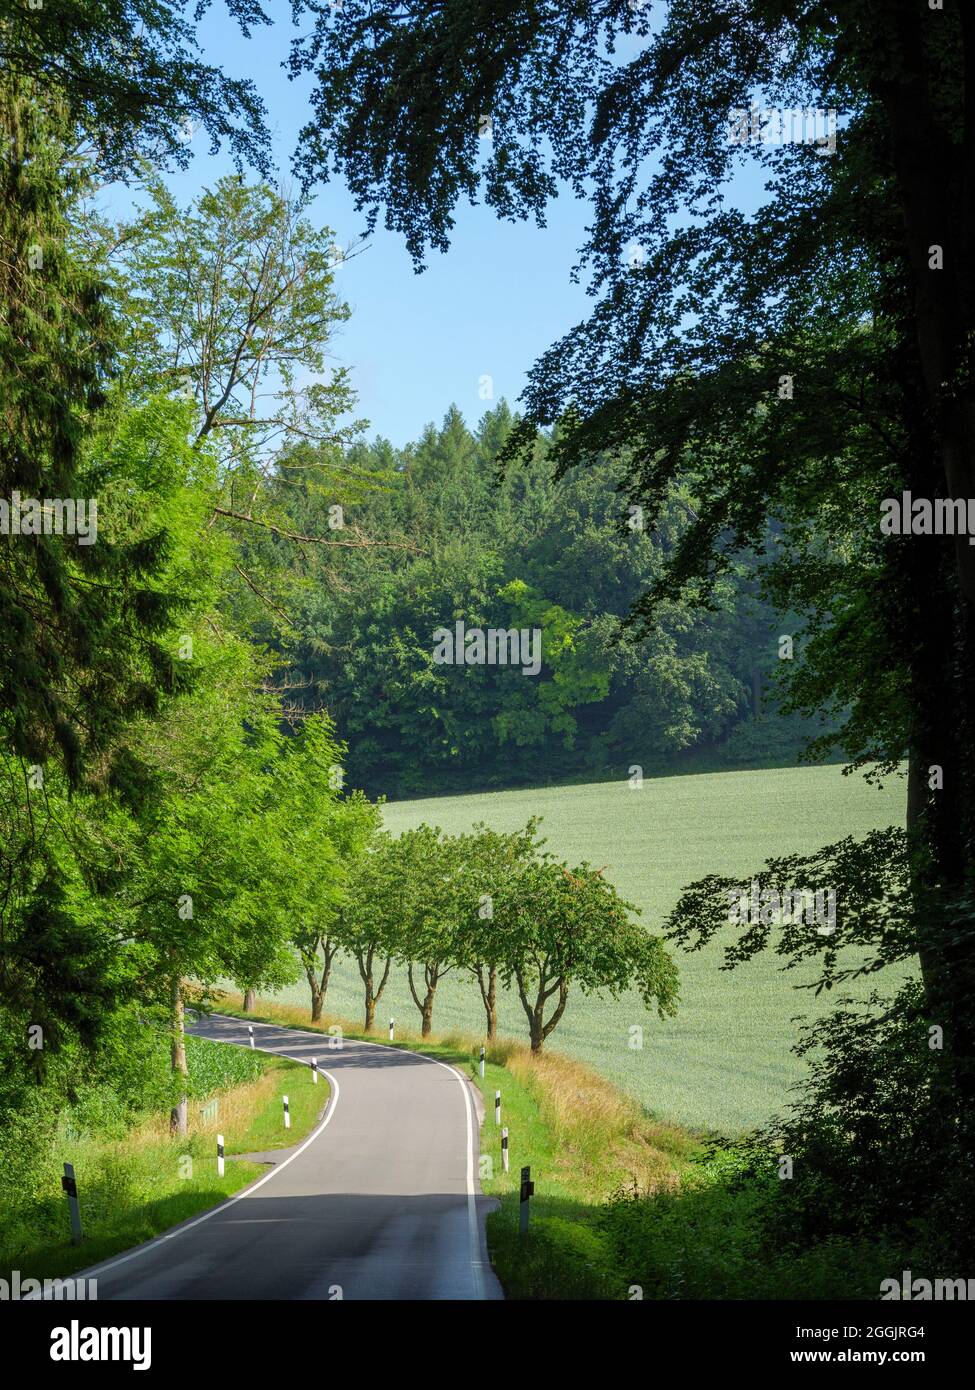 Country road between forests, Teutoburg Forest, Osnabruecker Land, Lower Saxony, Germany Stock Photo